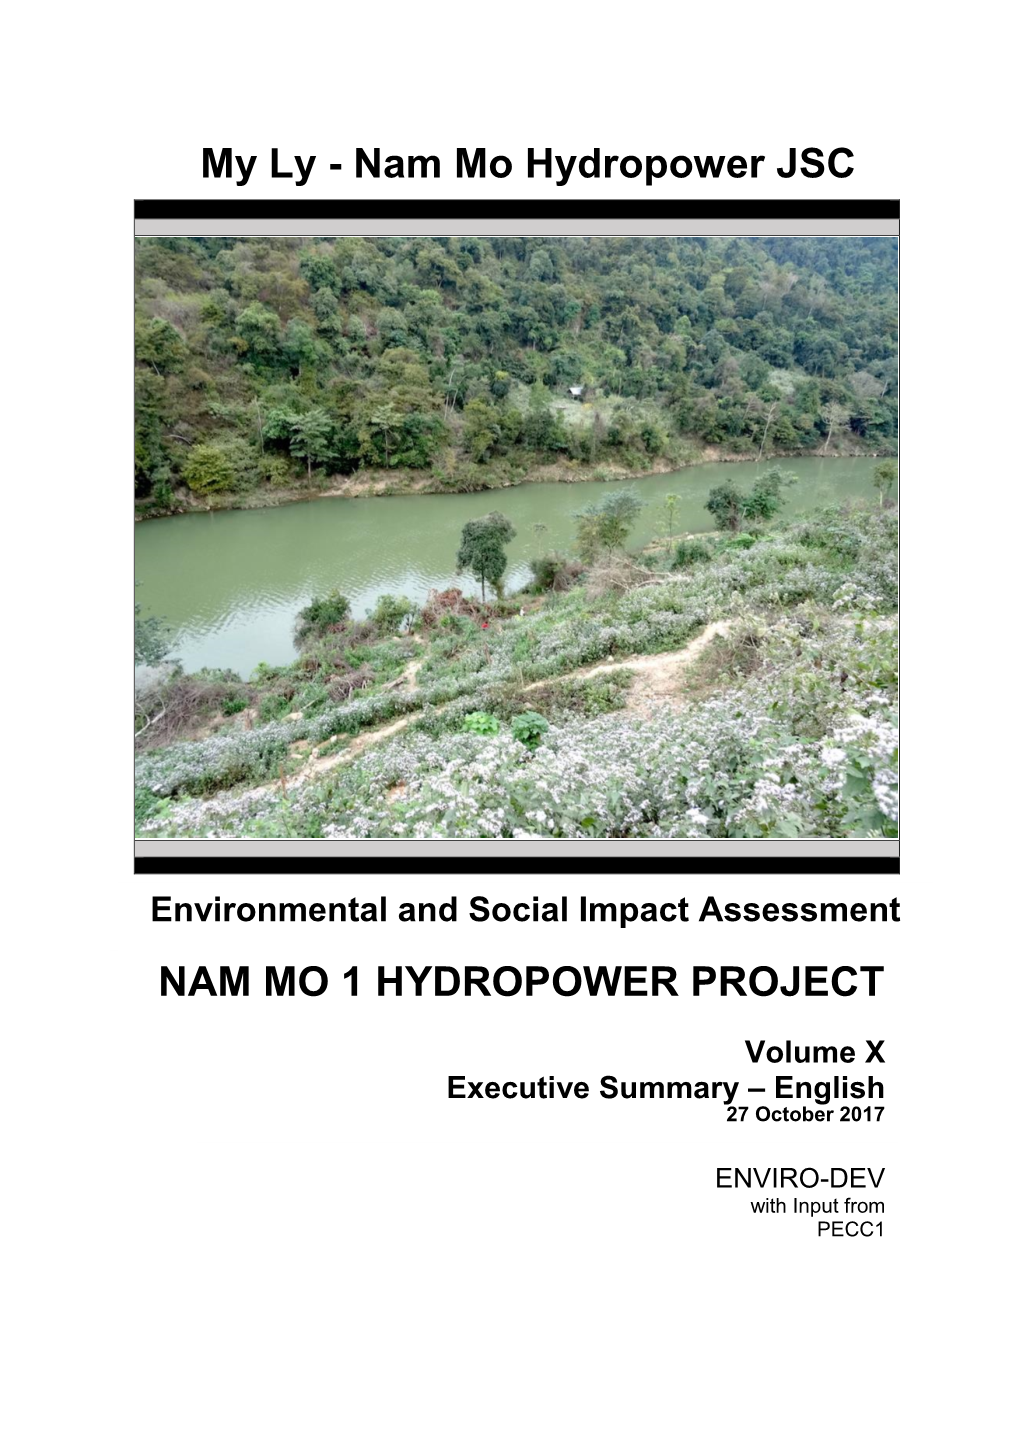 NAM MO 1 HYDROPOWER PROJECT My Ly